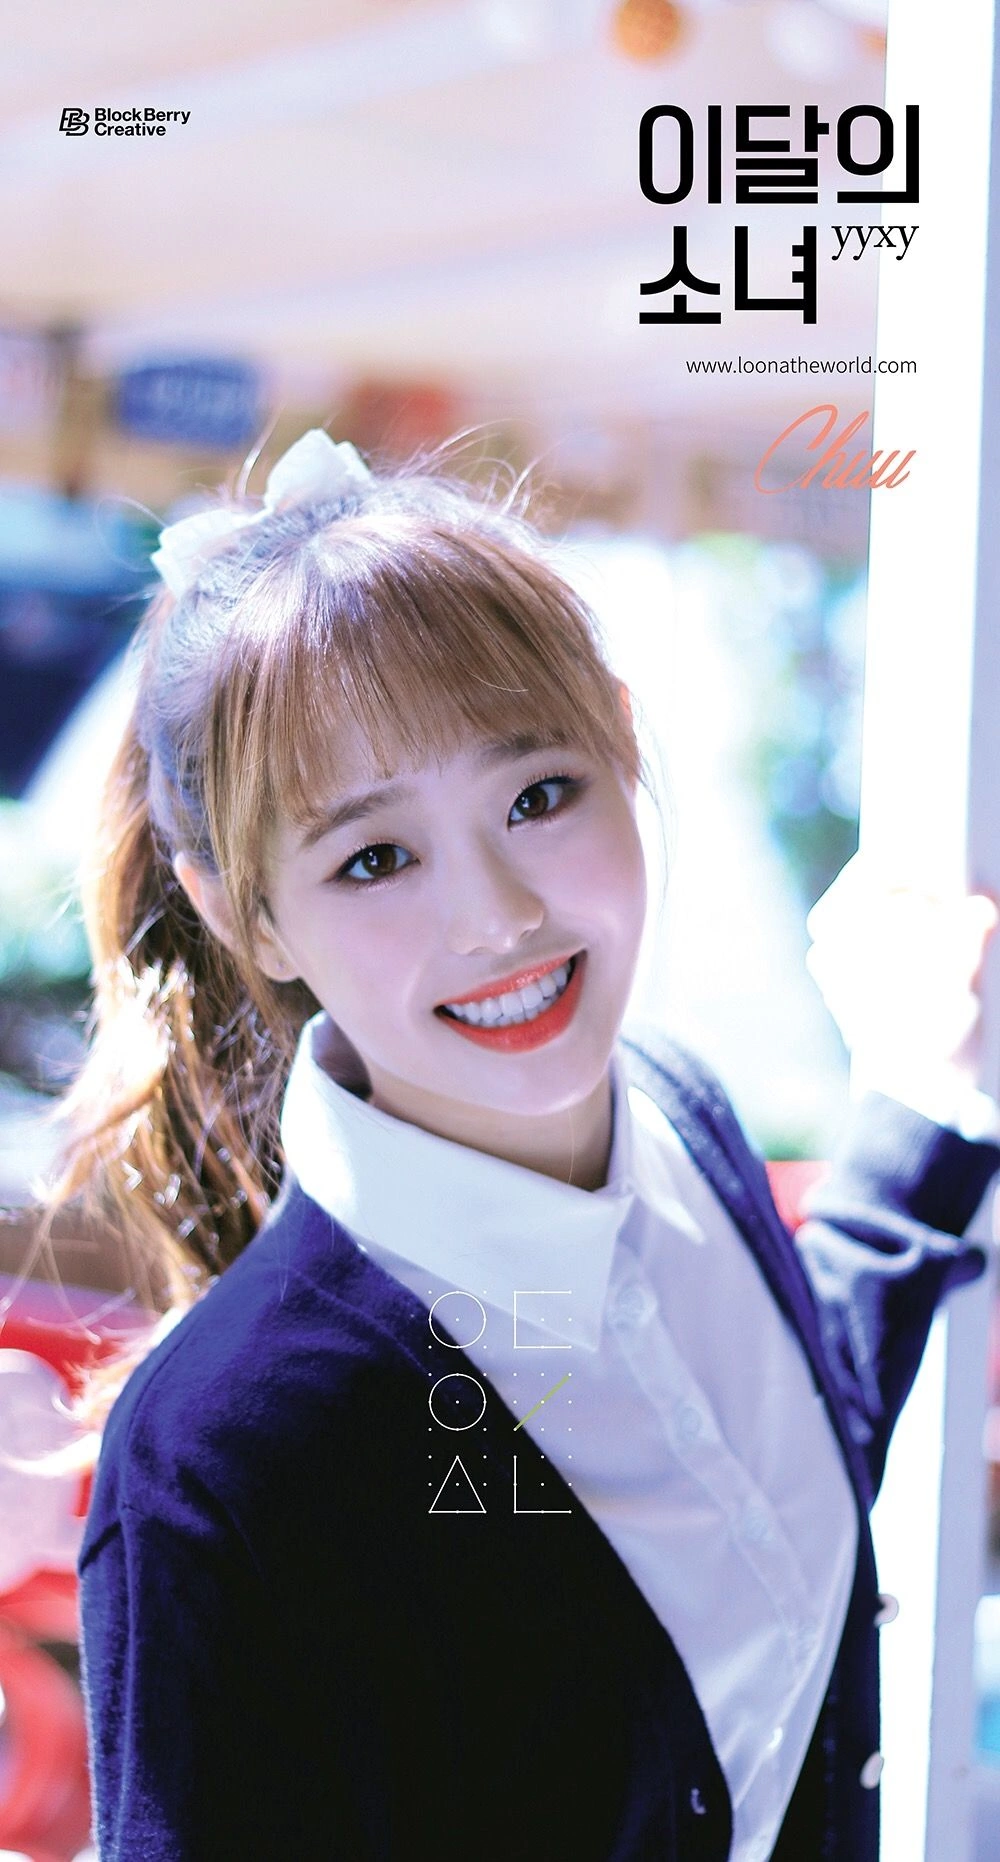 Loona yyxy Beauty & the Beat Chuu Concept Teaser Picture Image Photo Kpop K-Concept 2